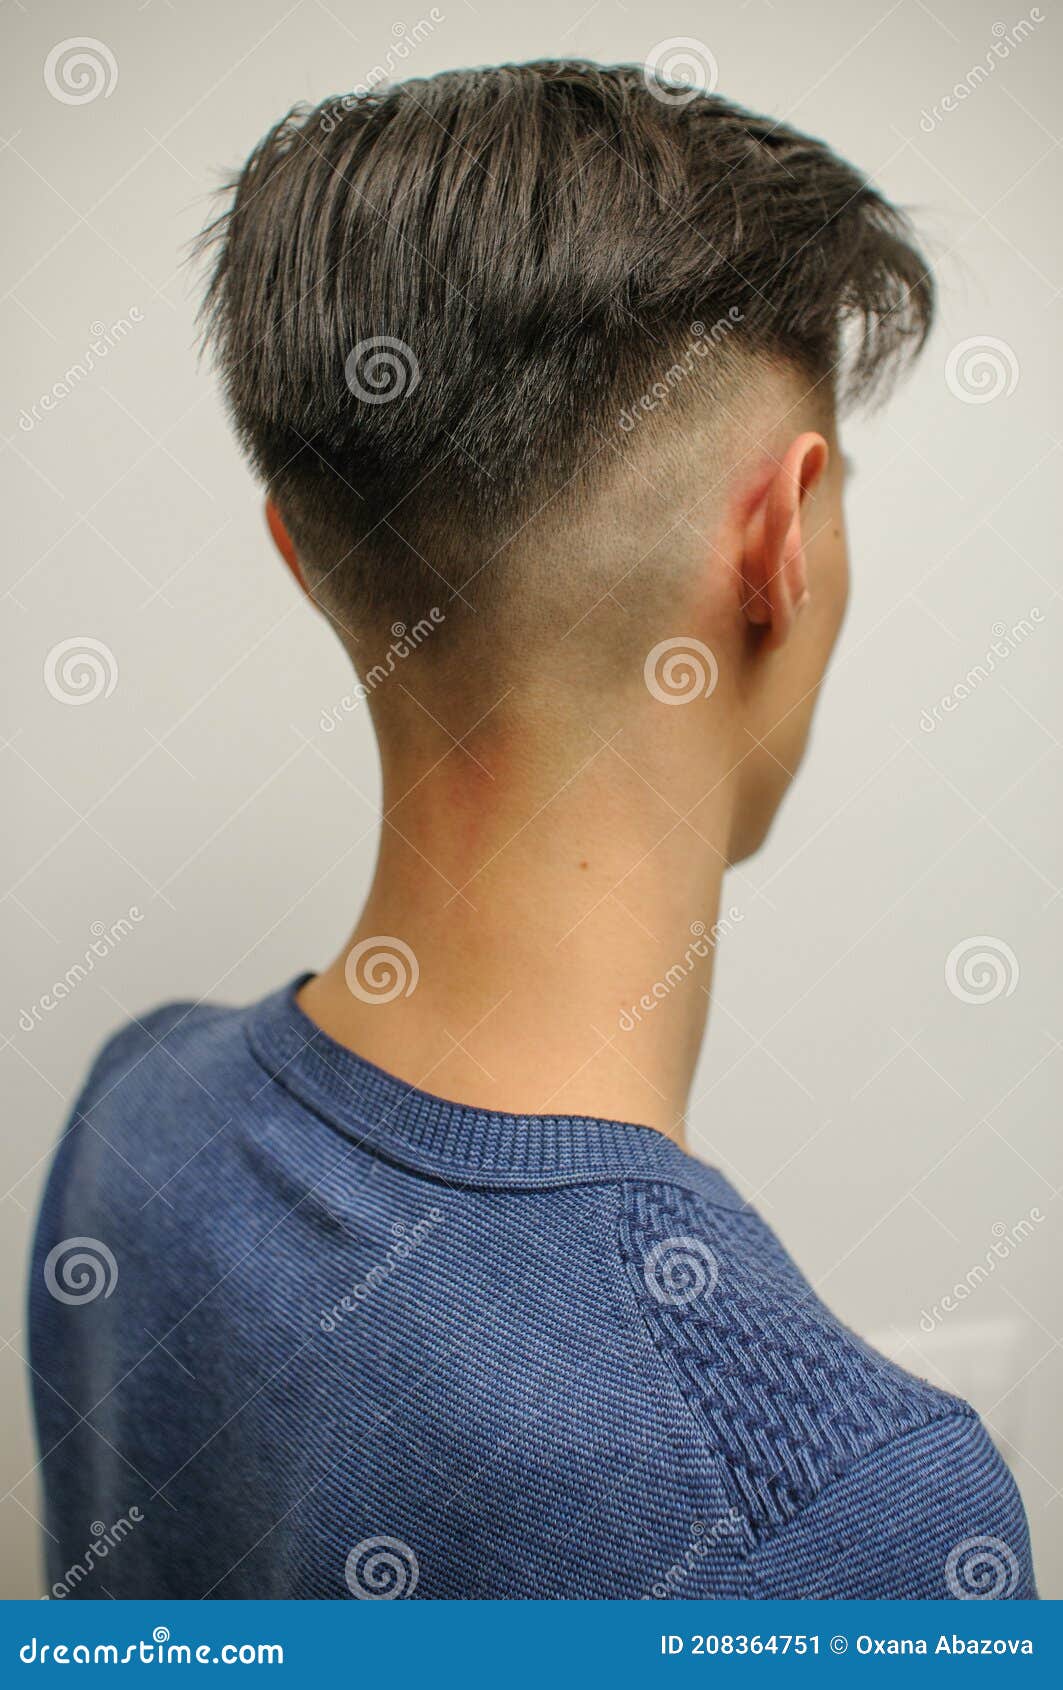 Short Haircut on a Young Man with Dark Hair Stock Image - Image of short,  people: 208364751